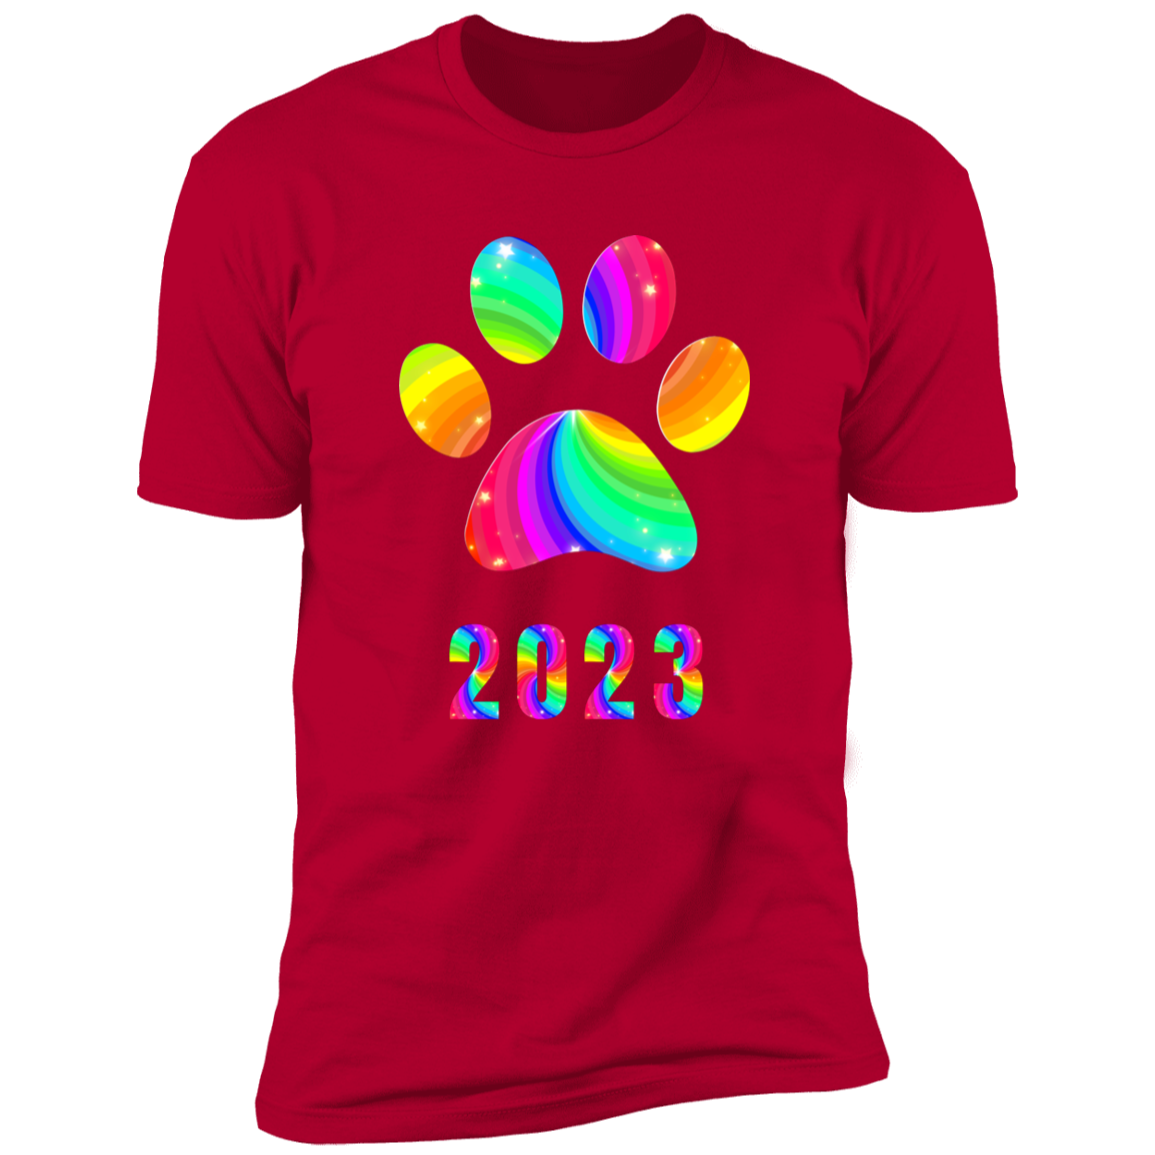 Pride Paw 2023 (Swirl) Pride T-shirt, Paw Pride Dog Shirt for humans, in red